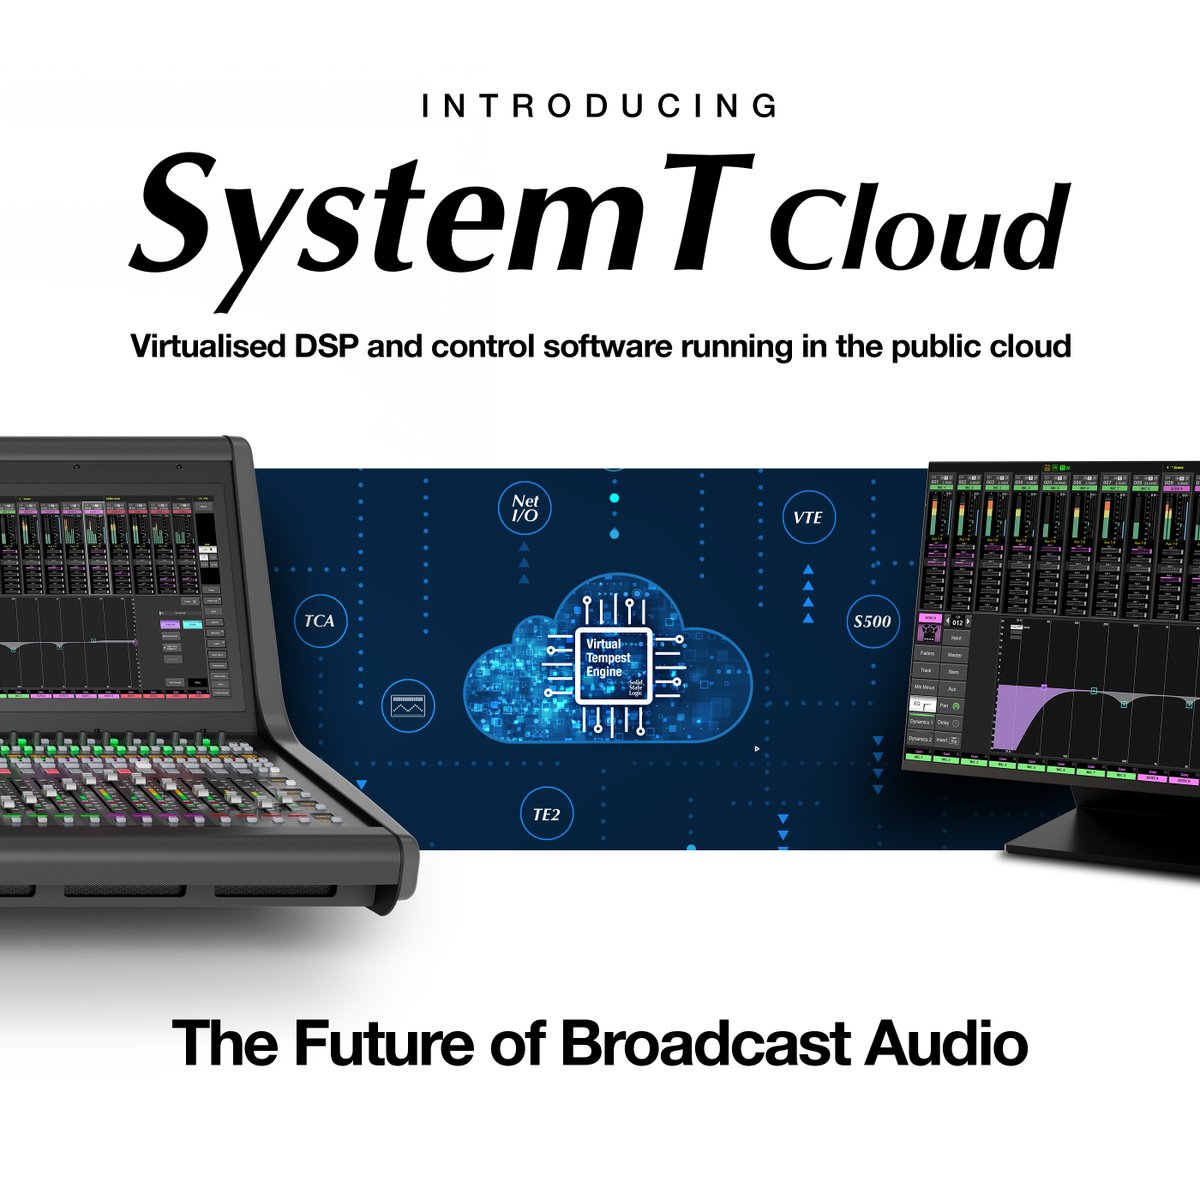 Solid State Logic Launch System T Cloud – A Pioneering Virtualised Mixing Solution for Broadcast Audio. Find out more about the future of broadcast audio: bit.ly/SystemTCloud